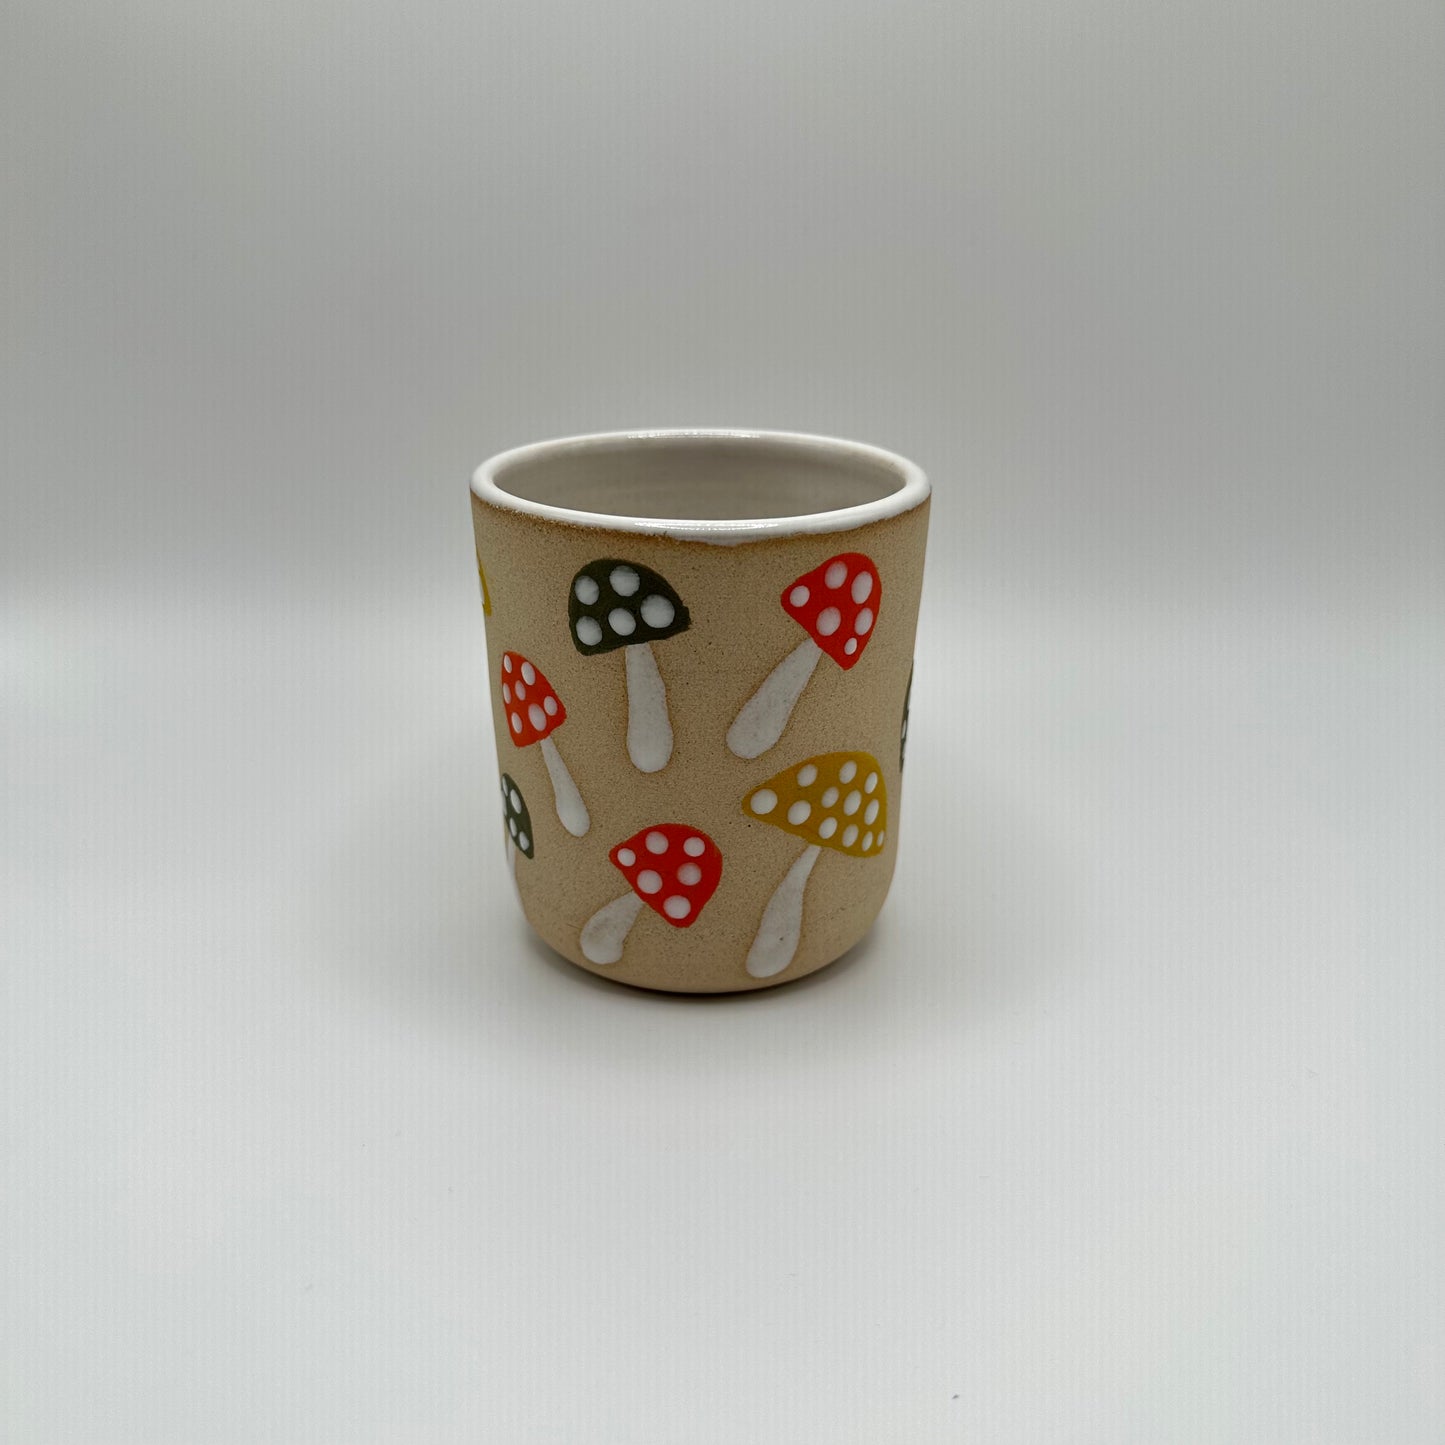 Ceramic tumbler hand painted with various mushrooms in mustard, green, and orange with white stems and white dots on the caps.